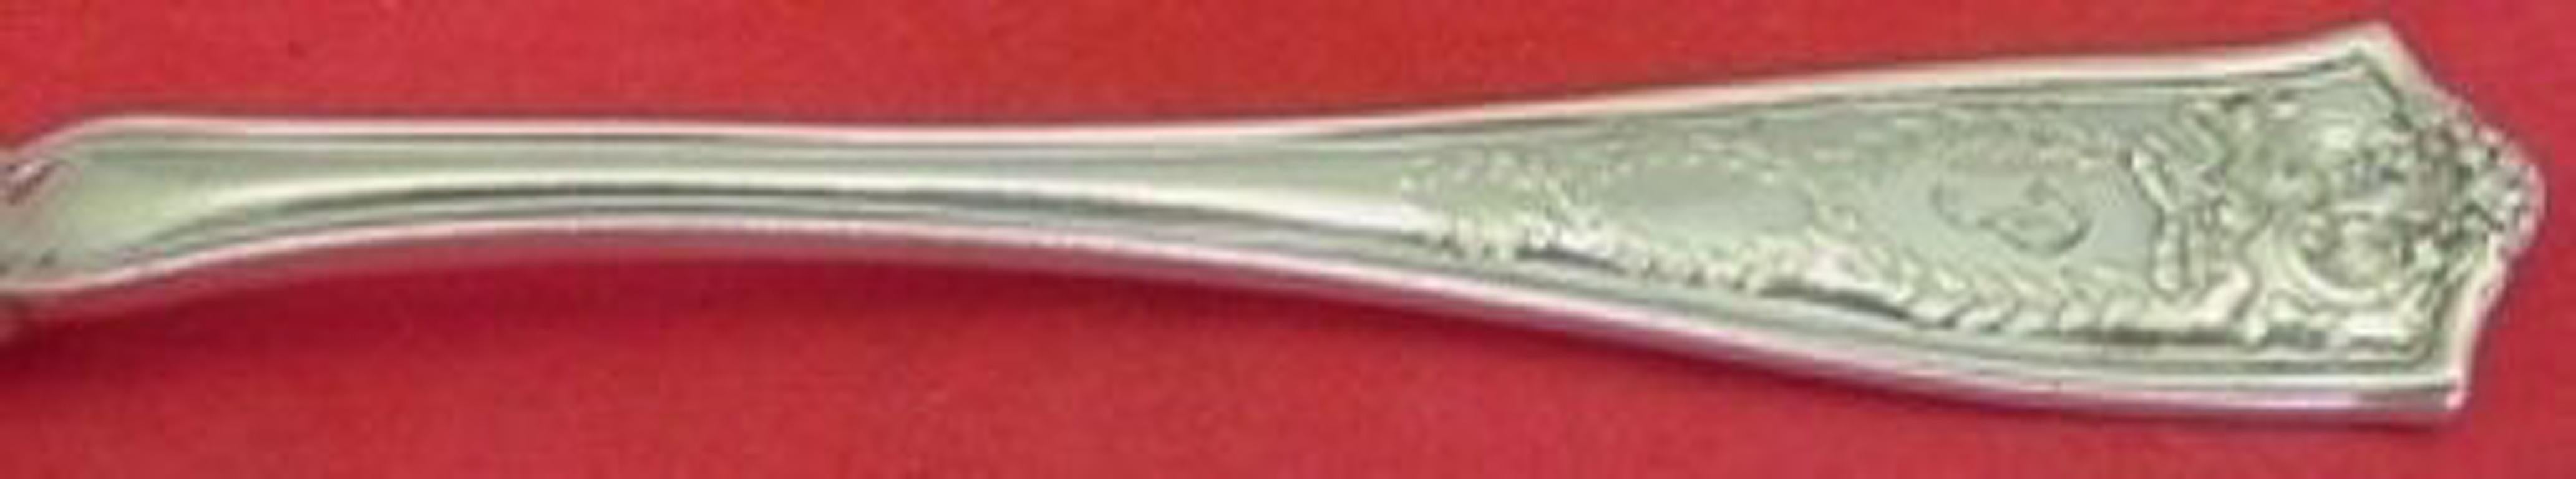 Sterling silver serving spoon 8 5/8